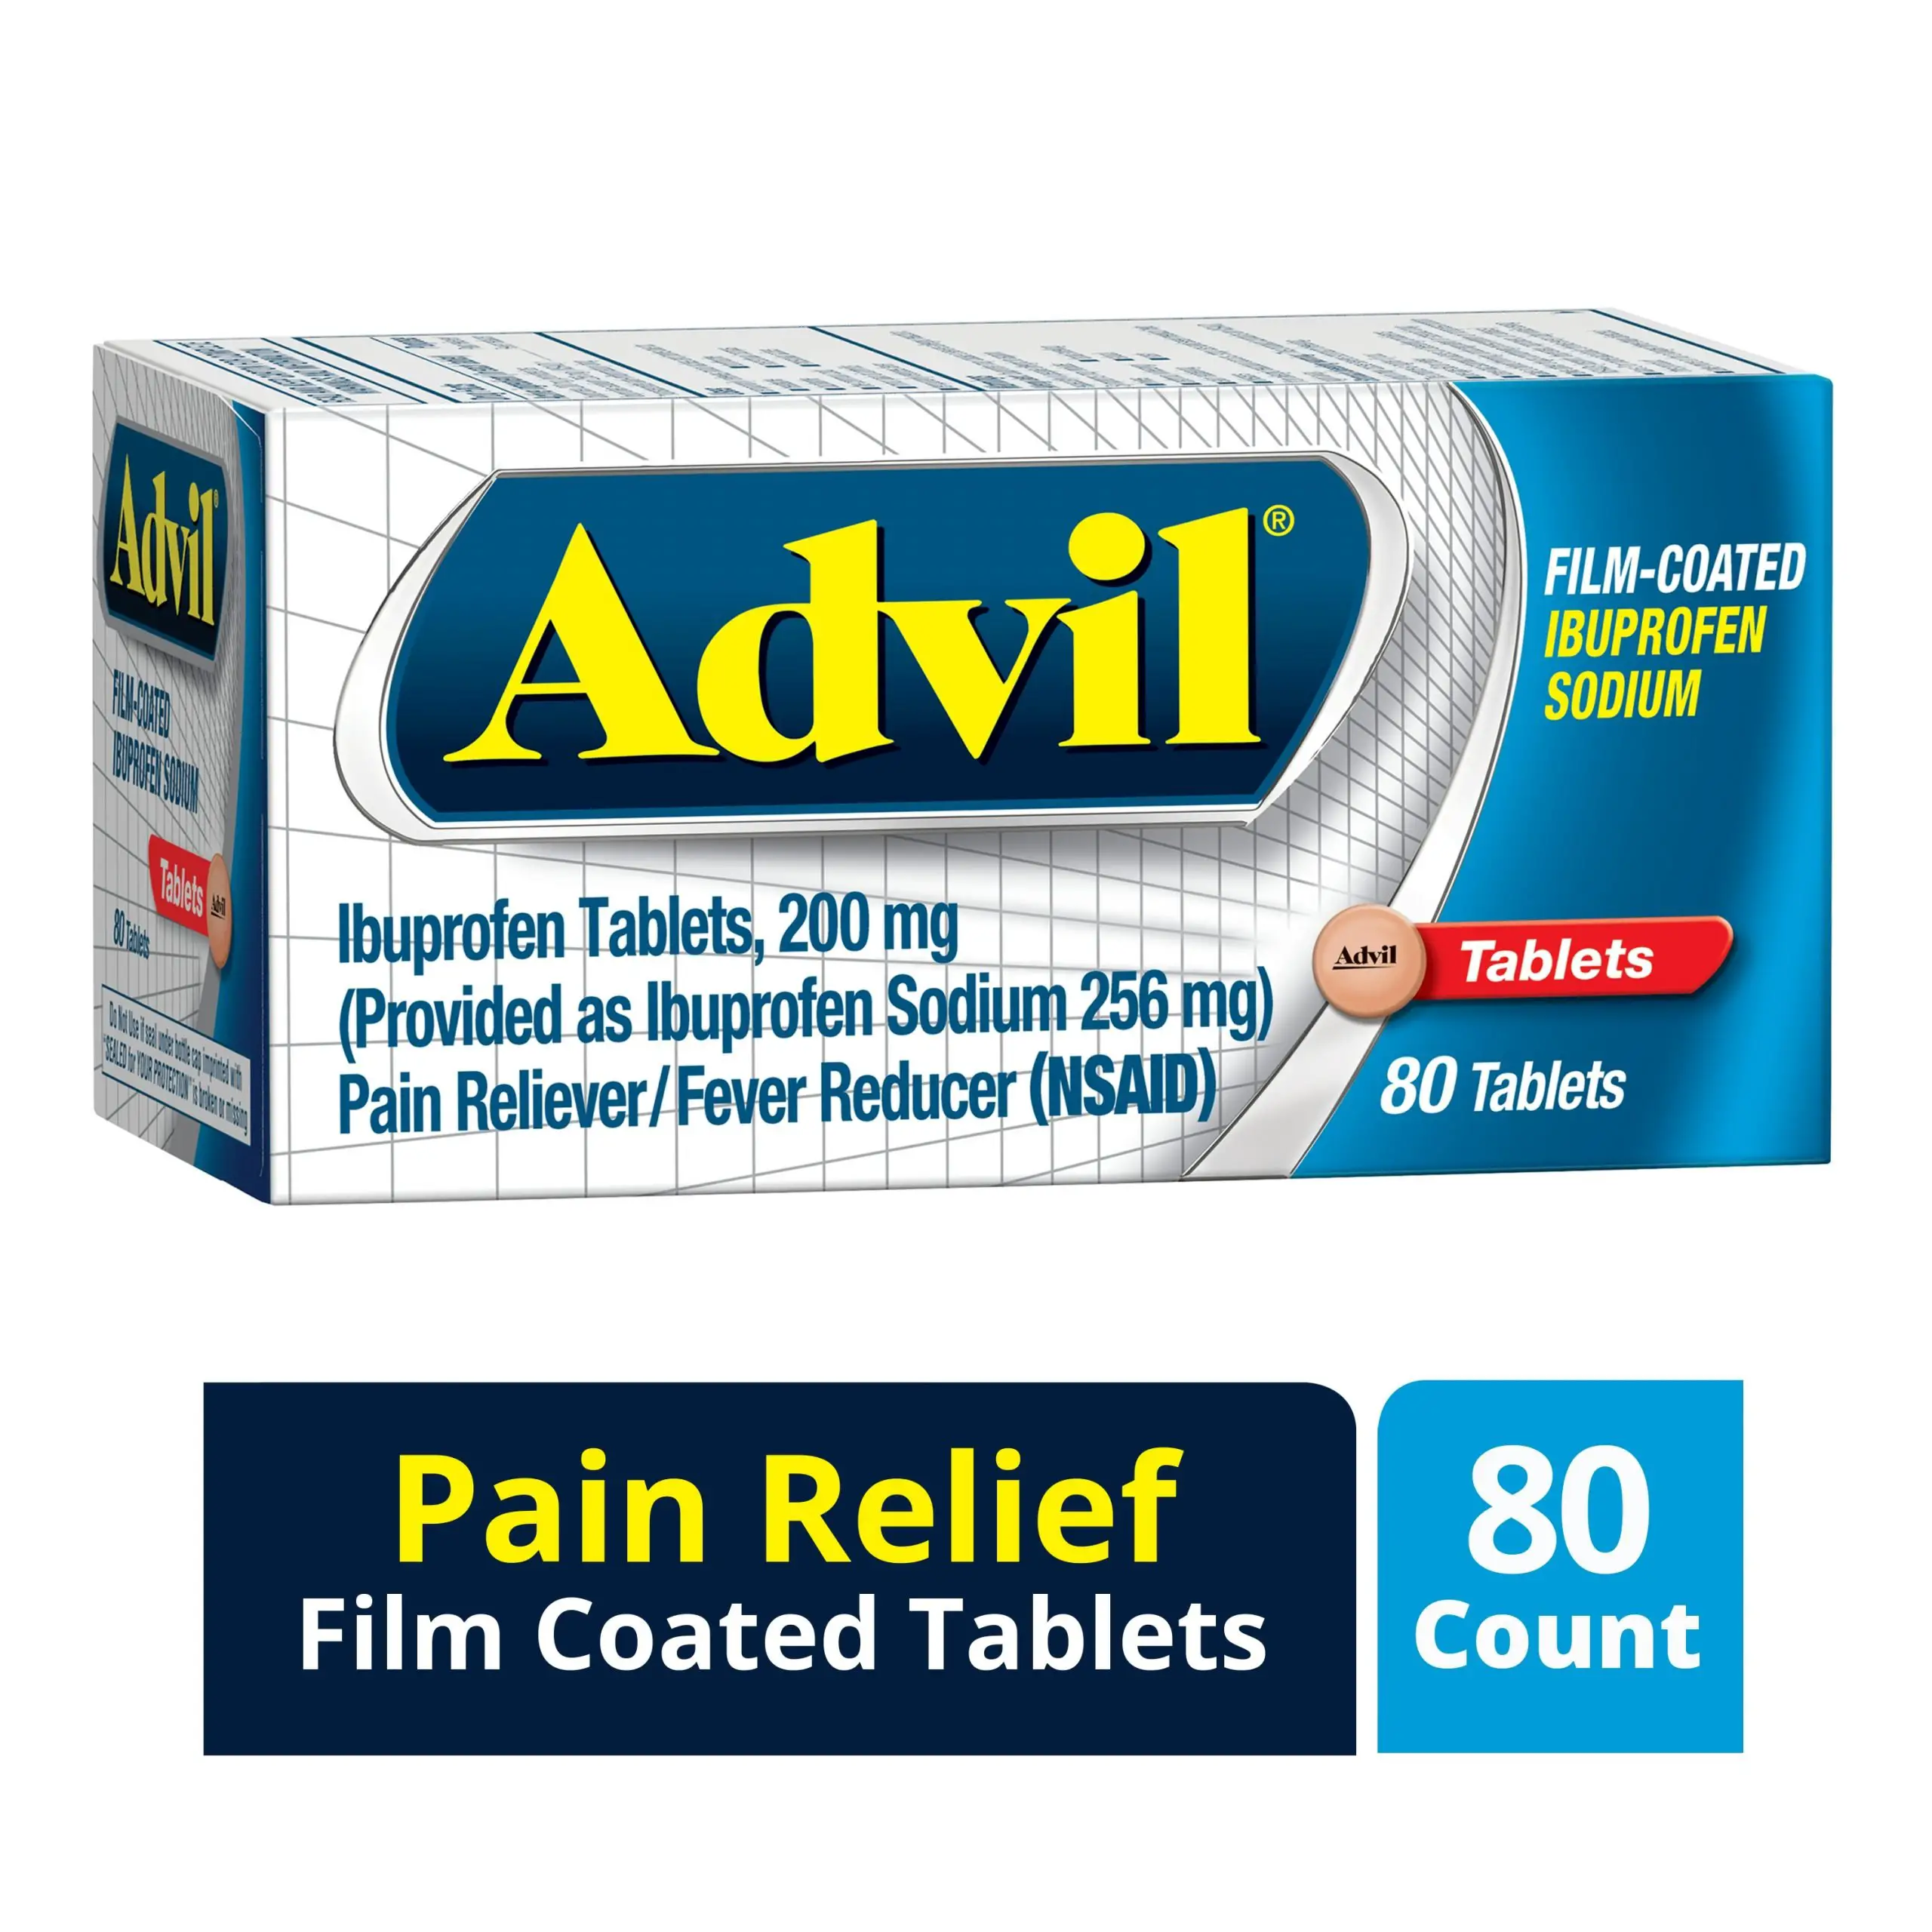 Advil Pain Reliever/Fever Reducer Ibuprofen Coated Tablets, 200 mg, 80 ...